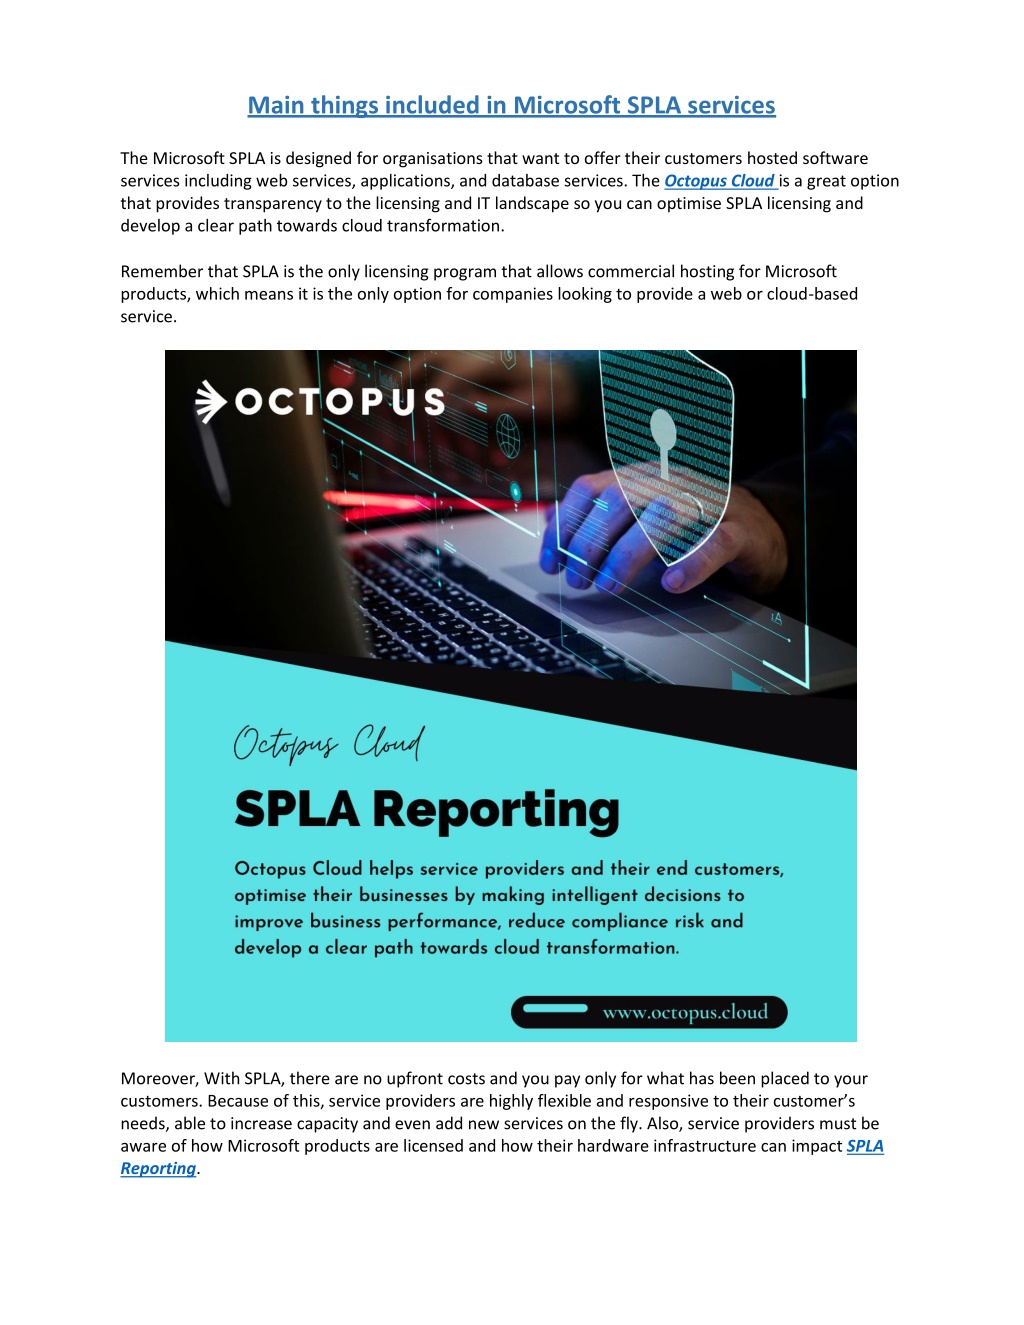 PPT Microsoft SPLA Reporting PowerPoint Presentation, free download